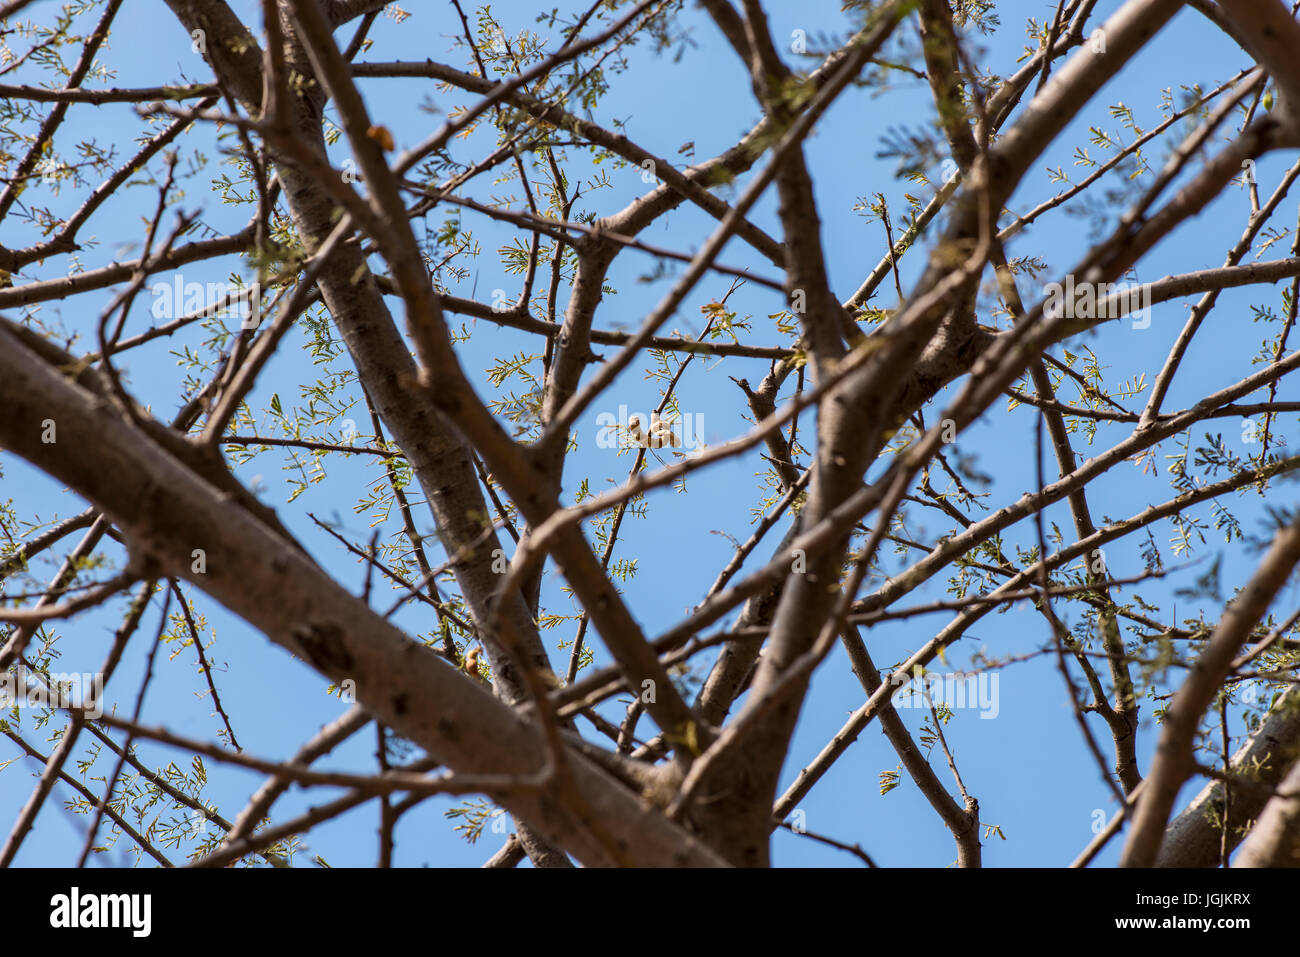 A typical thorny tree, probably an acacia catechu at the dry arid Mayureshwar Wildlife Sanctuary in India Stock Photo